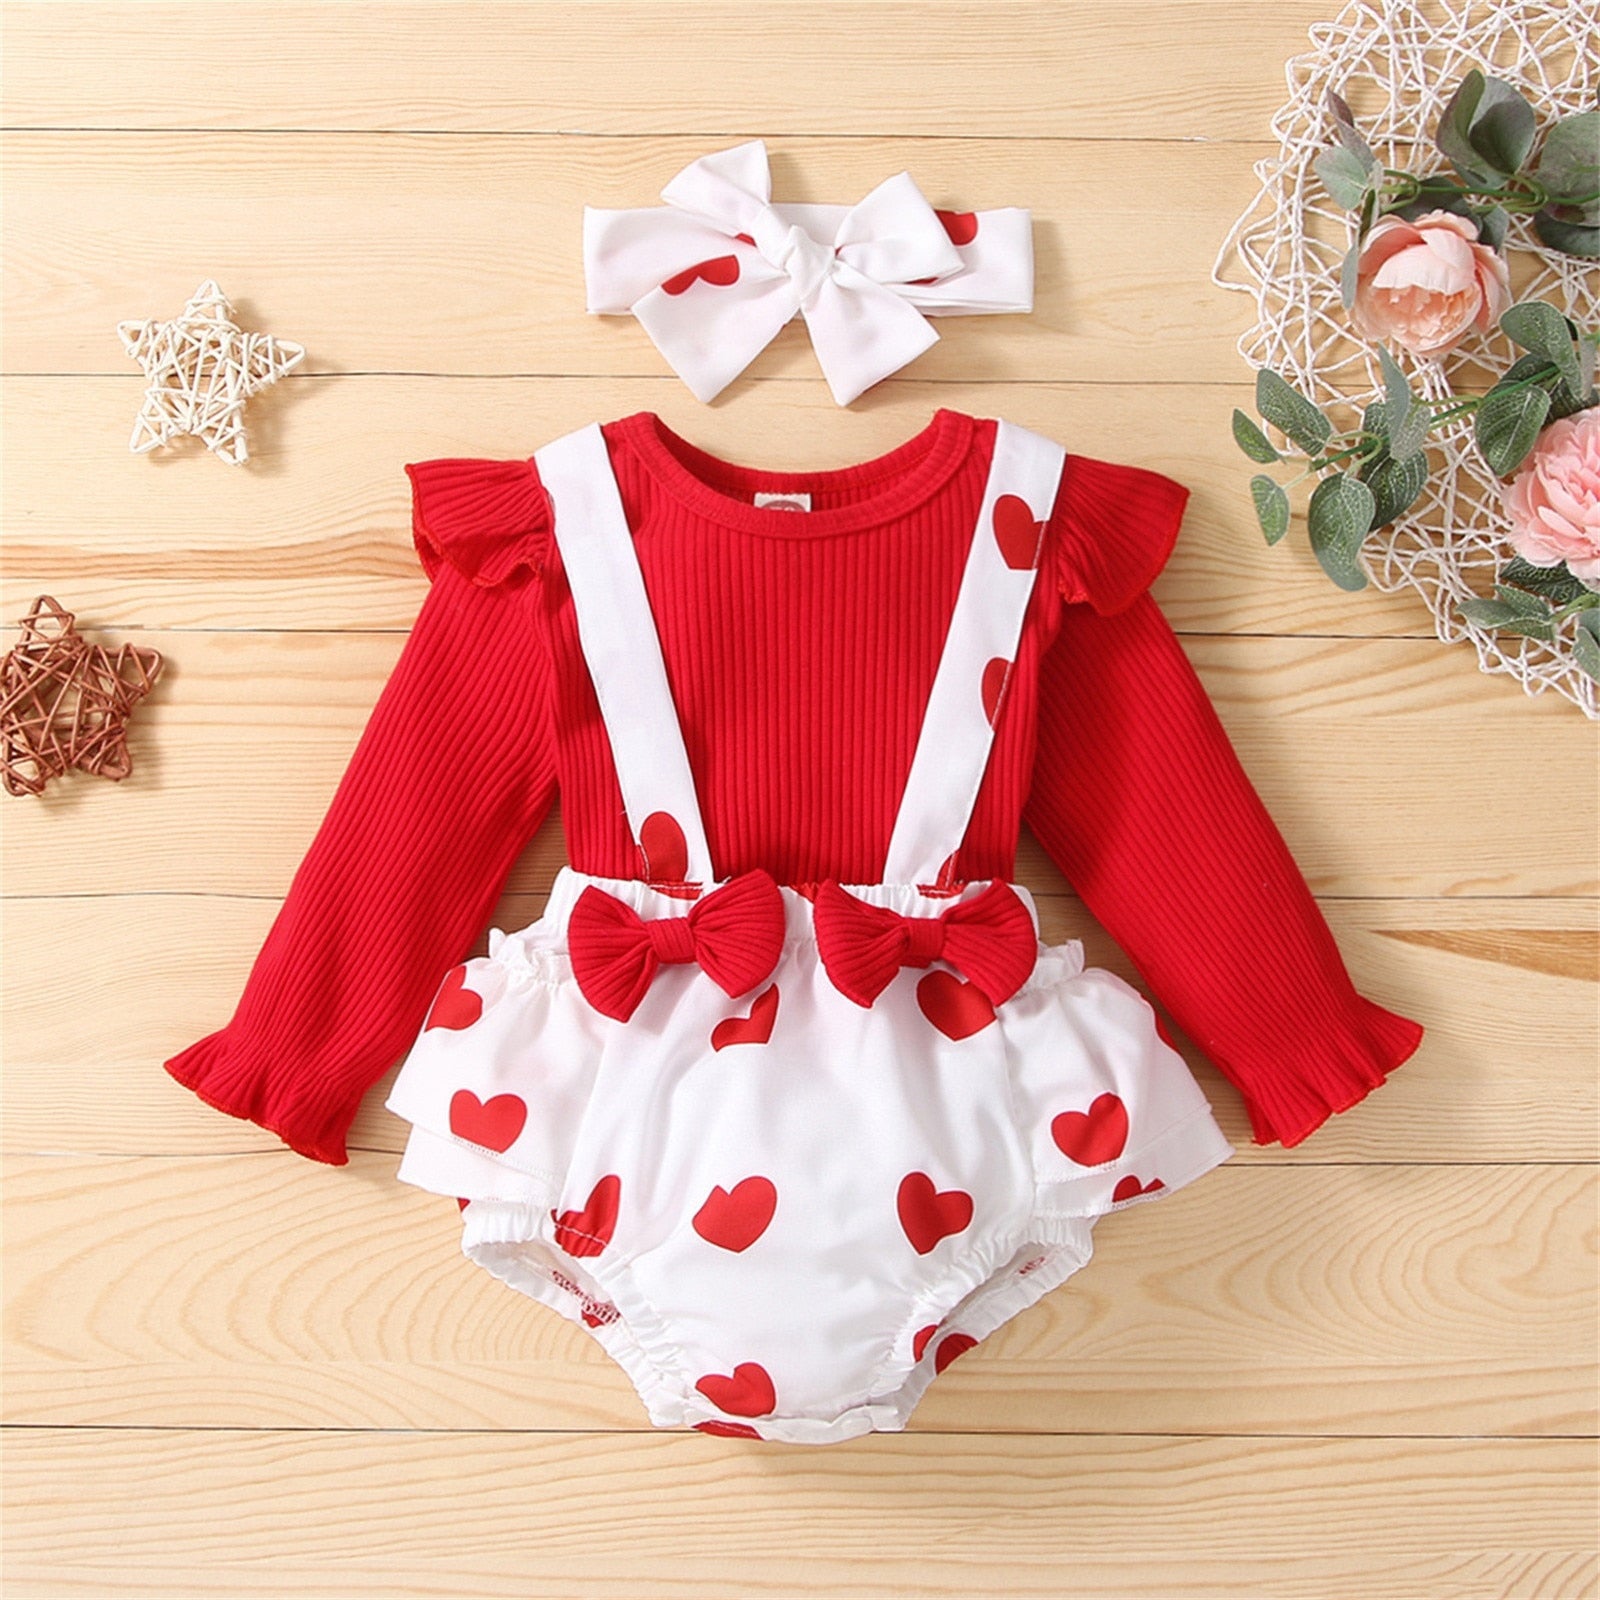 Get Ready for Valentine's Day with Adorable Heart Print Romper Sets for Baby Girls